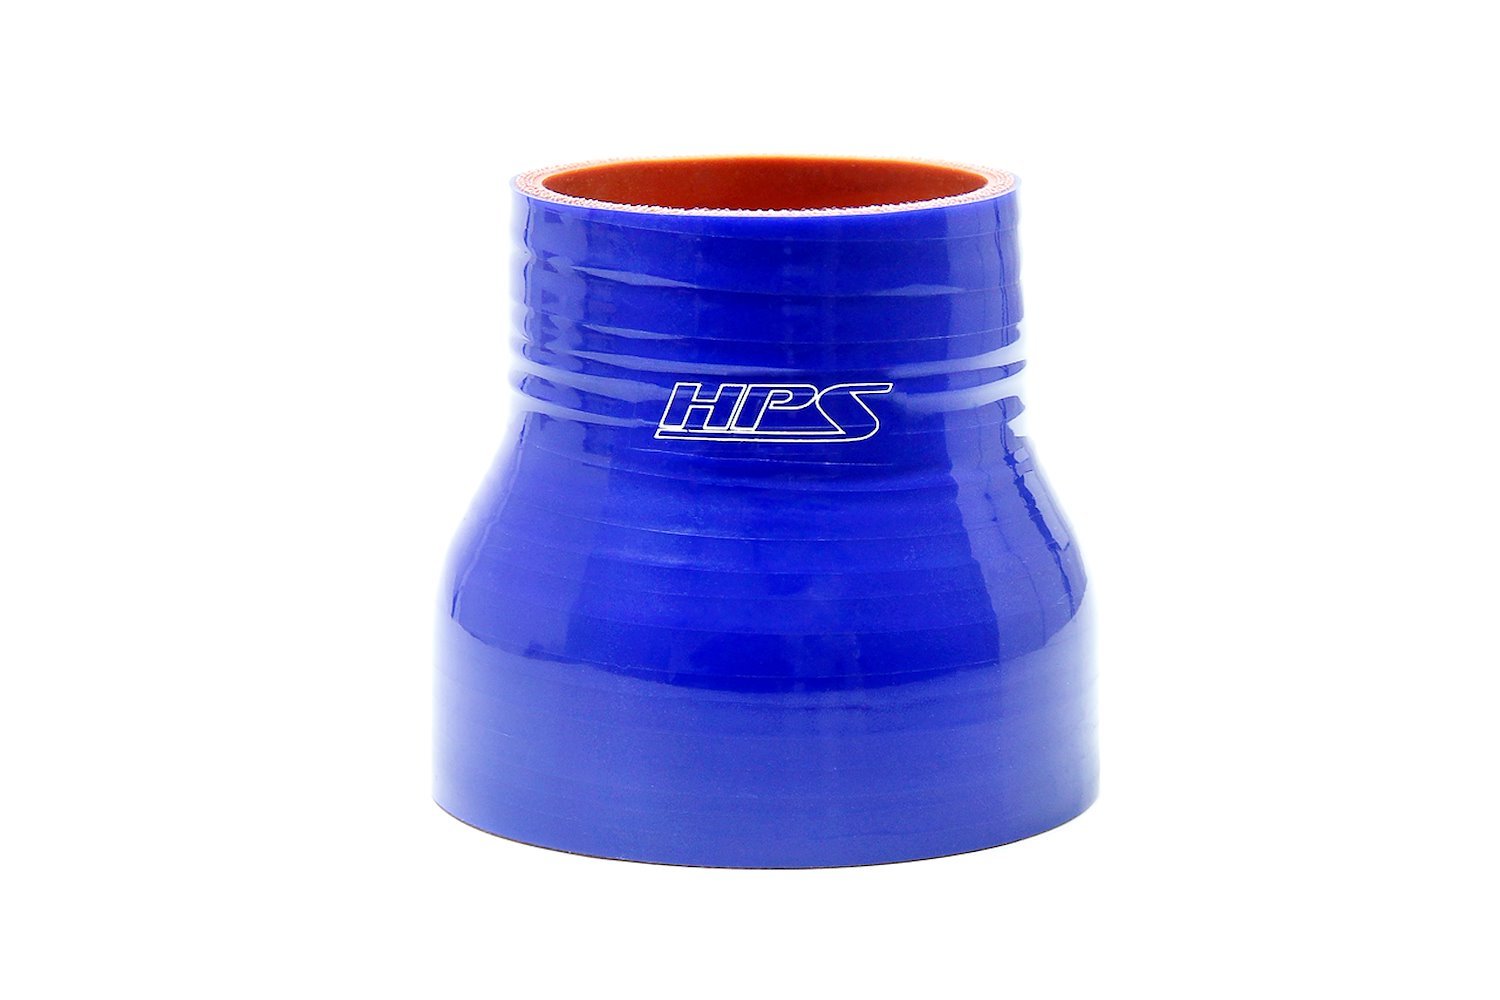 HTSR-275-350-BLUE Silicone Reducer Hose, High-Temp 4-Ply Reinforced, 2-3/4 in. - 3-1/2 in. ID, 3 in. Long, Blue